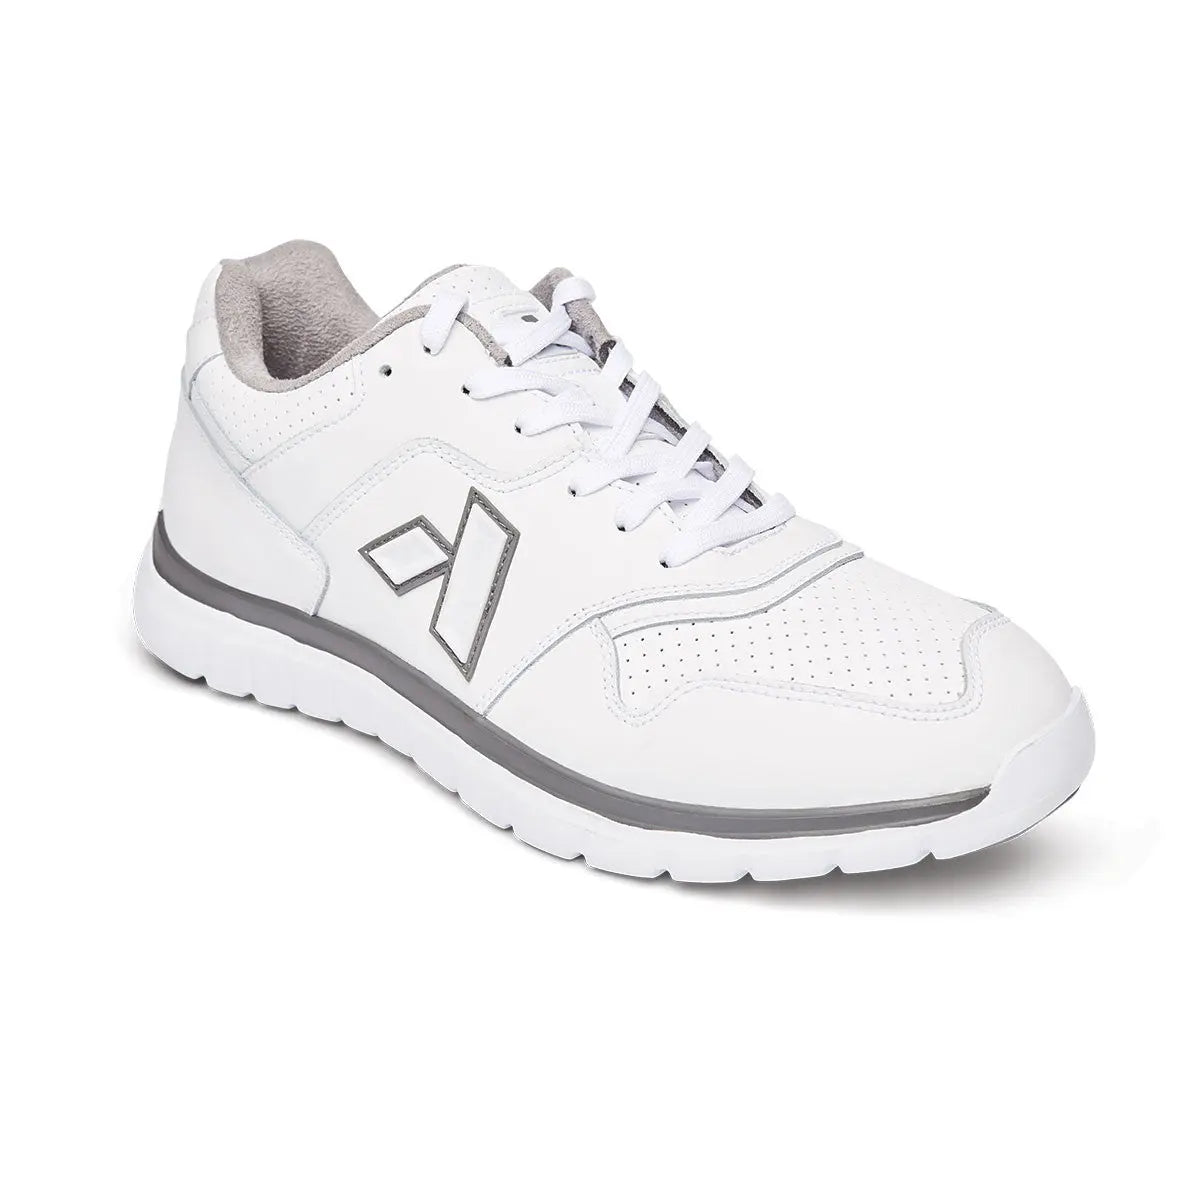 Anodyne Men's No.50 Sport Trainer - White with action leather uppers